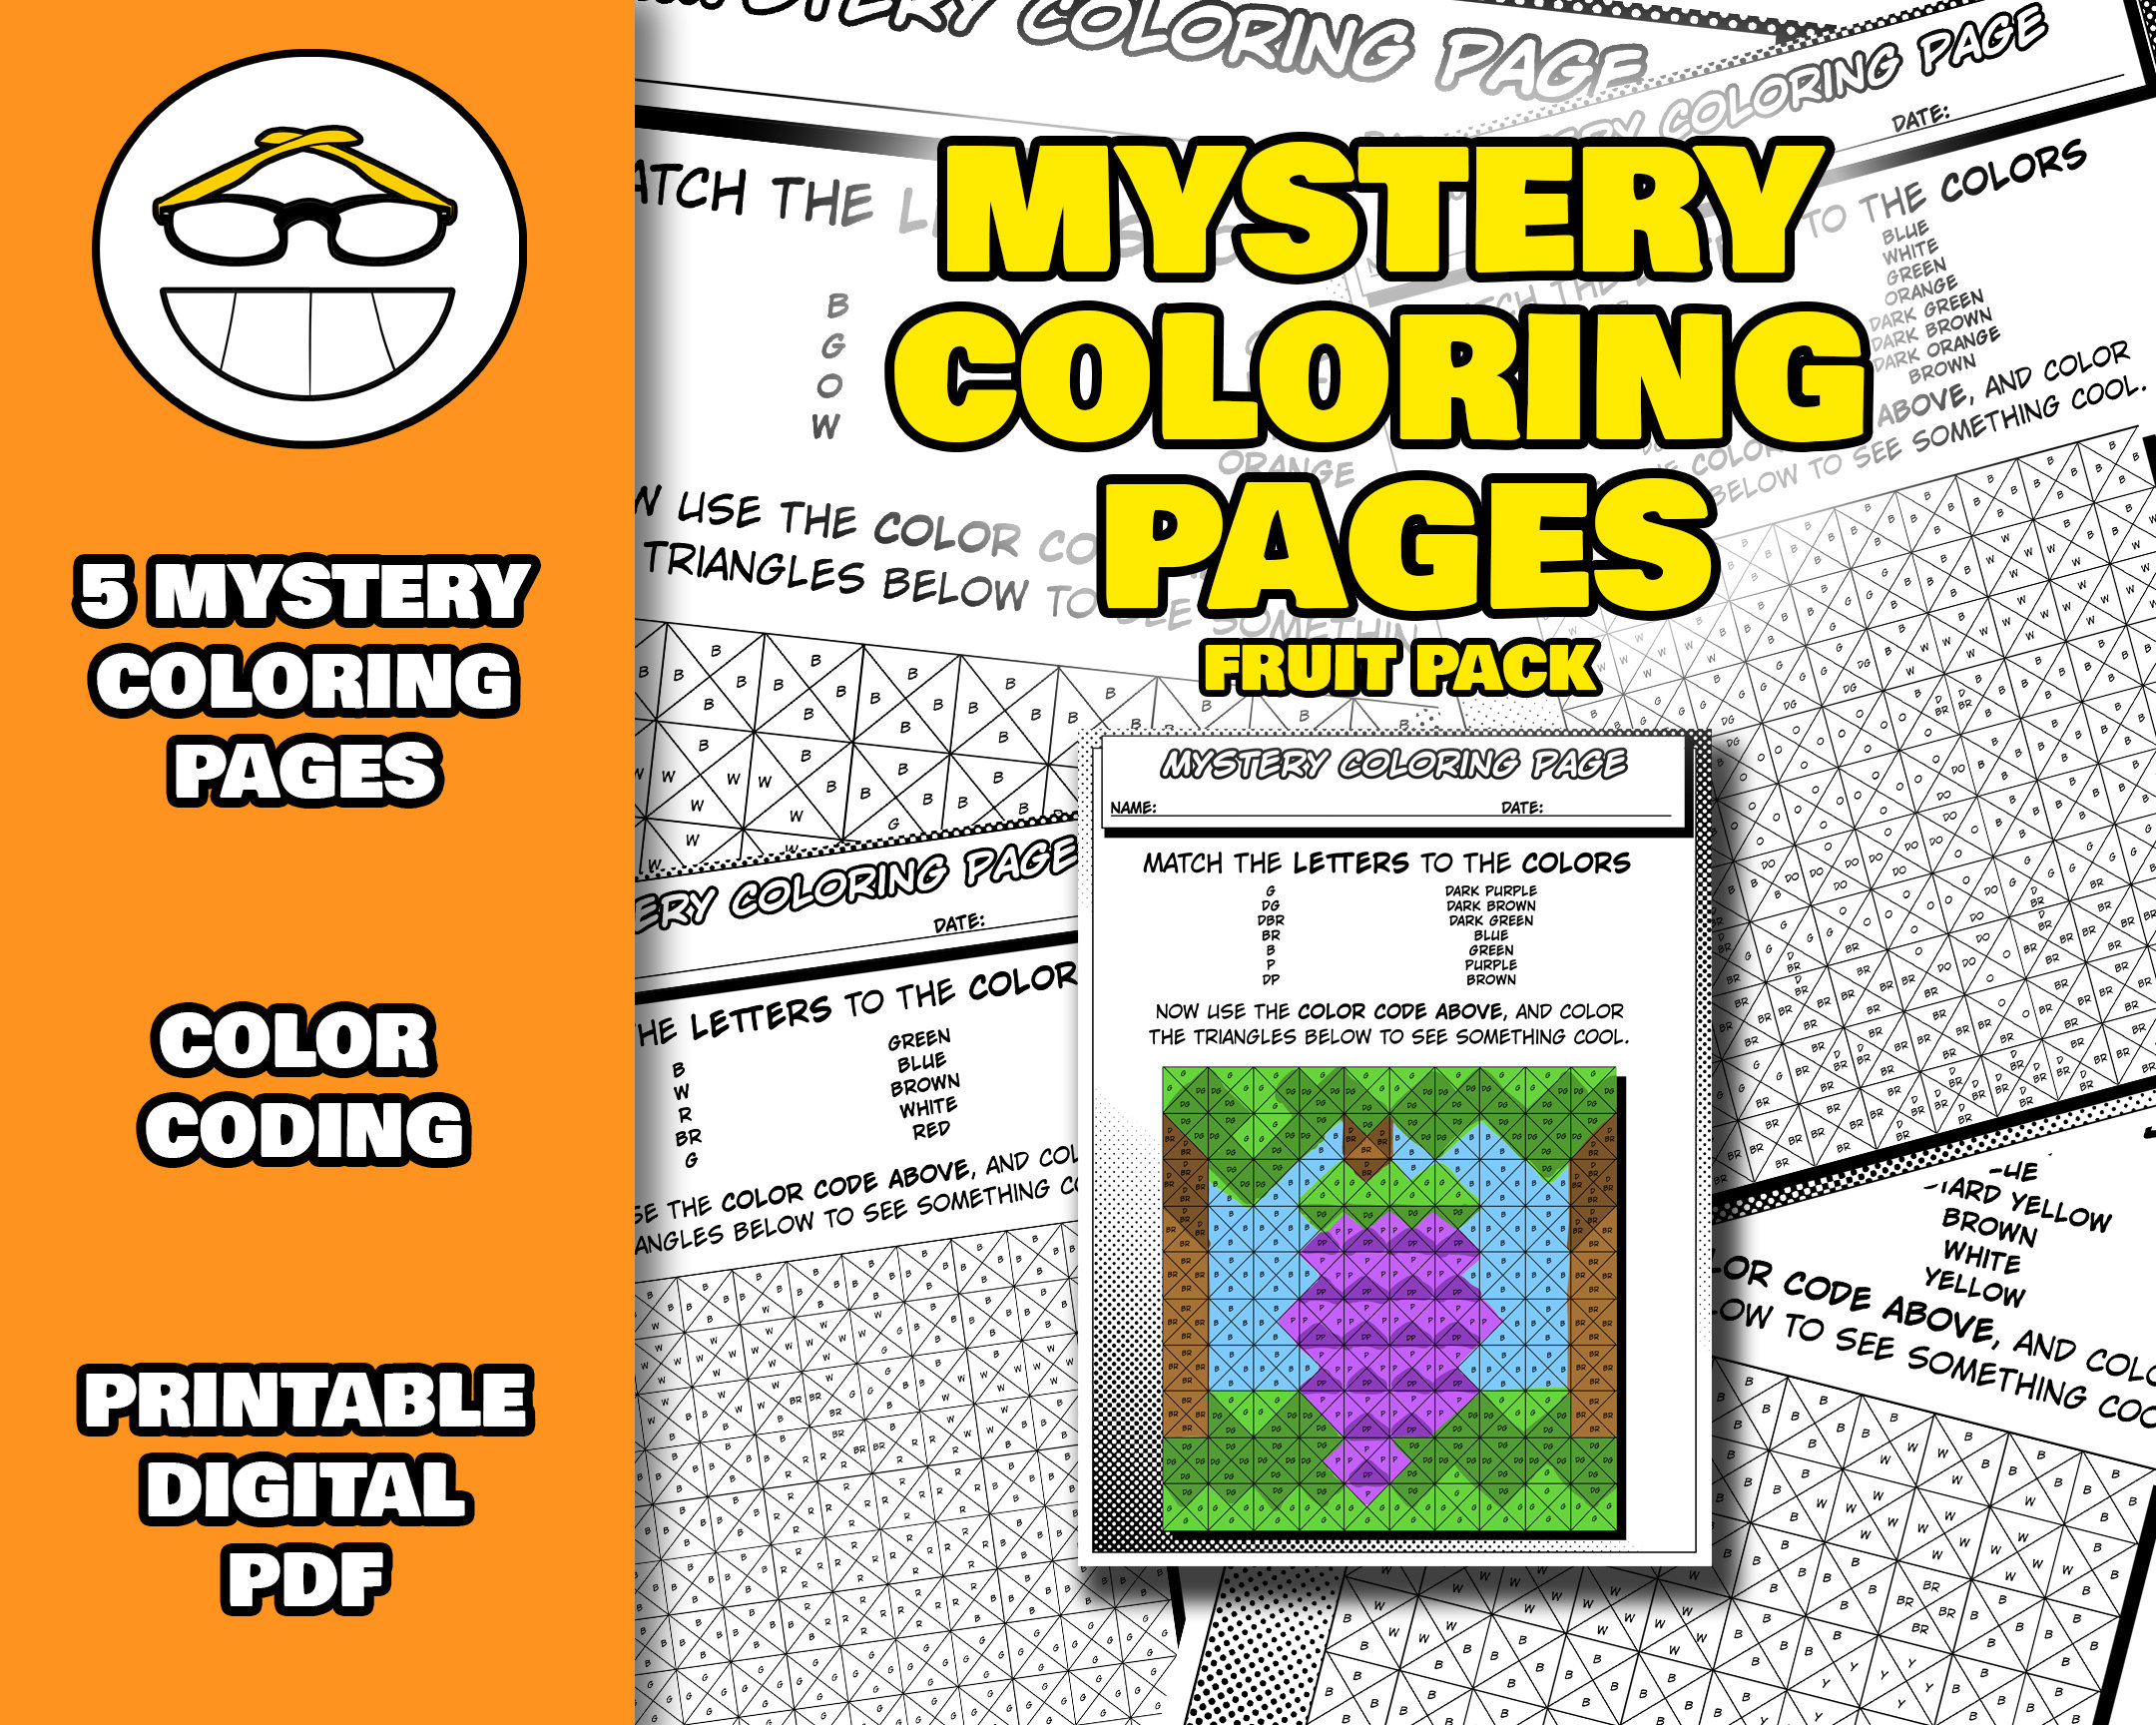 Mystery coloring pages fruit pack